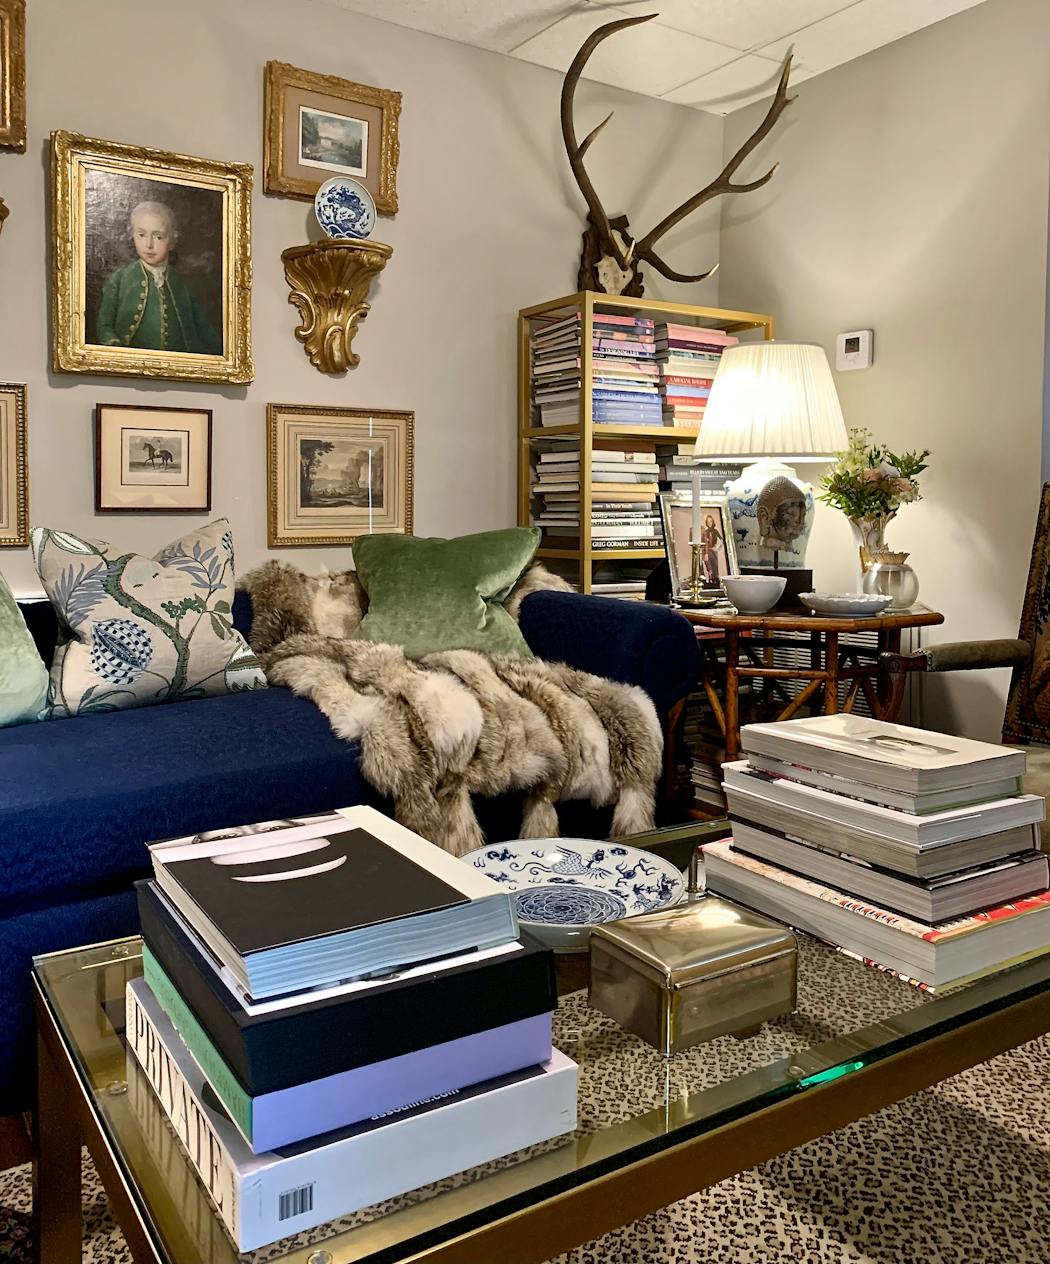 The brass and glass coffee table holds favorite books while allowing the leopard rug to make its presence known in Jim Miller’s chic and charming home. Scottish roebuck antlers draw the eye up and add height.